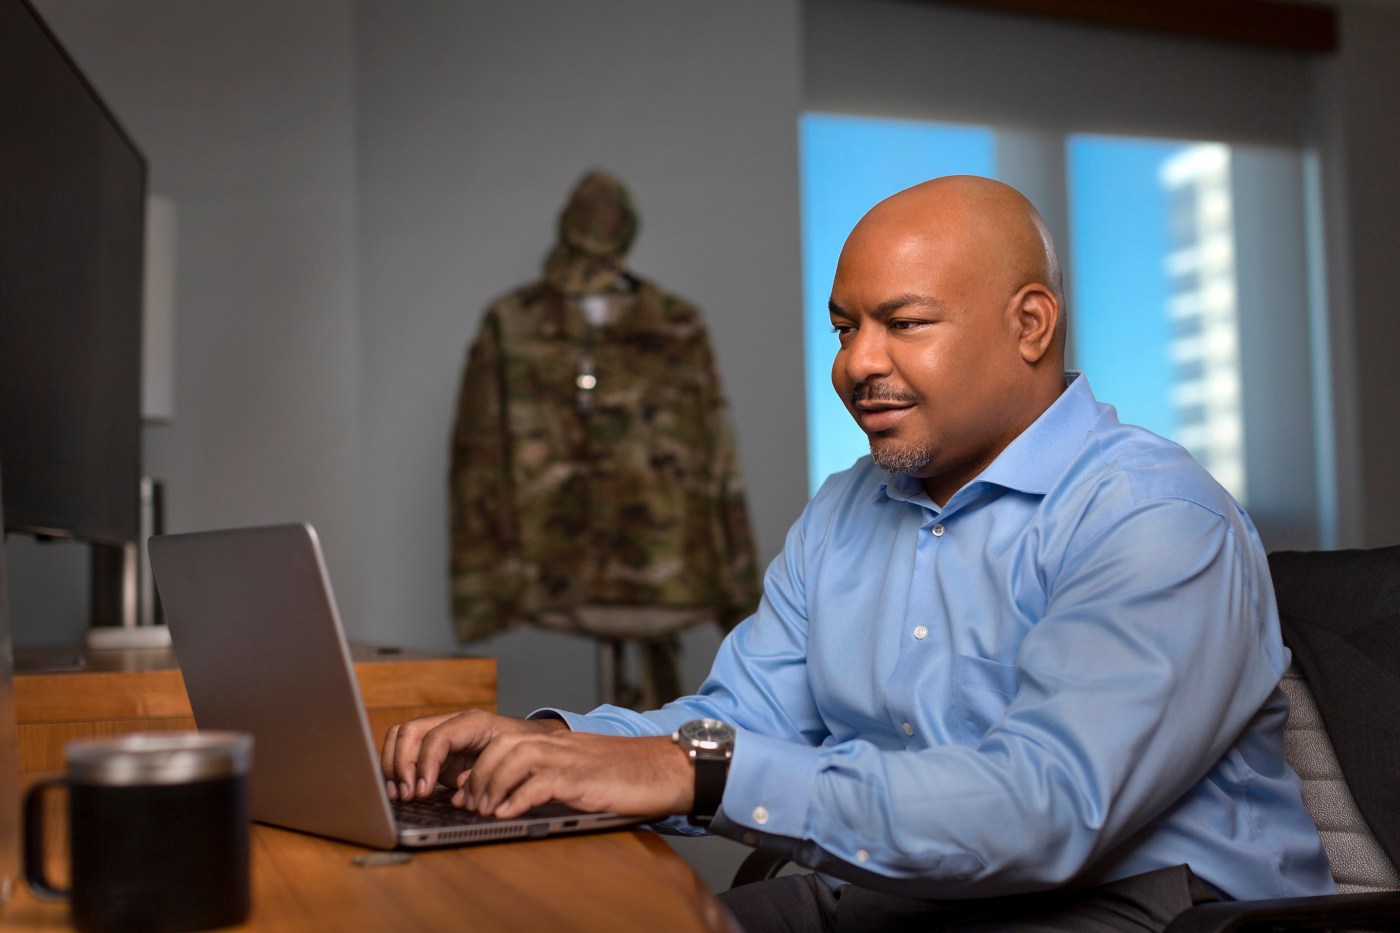 AARP provides valuable resources for Veterans